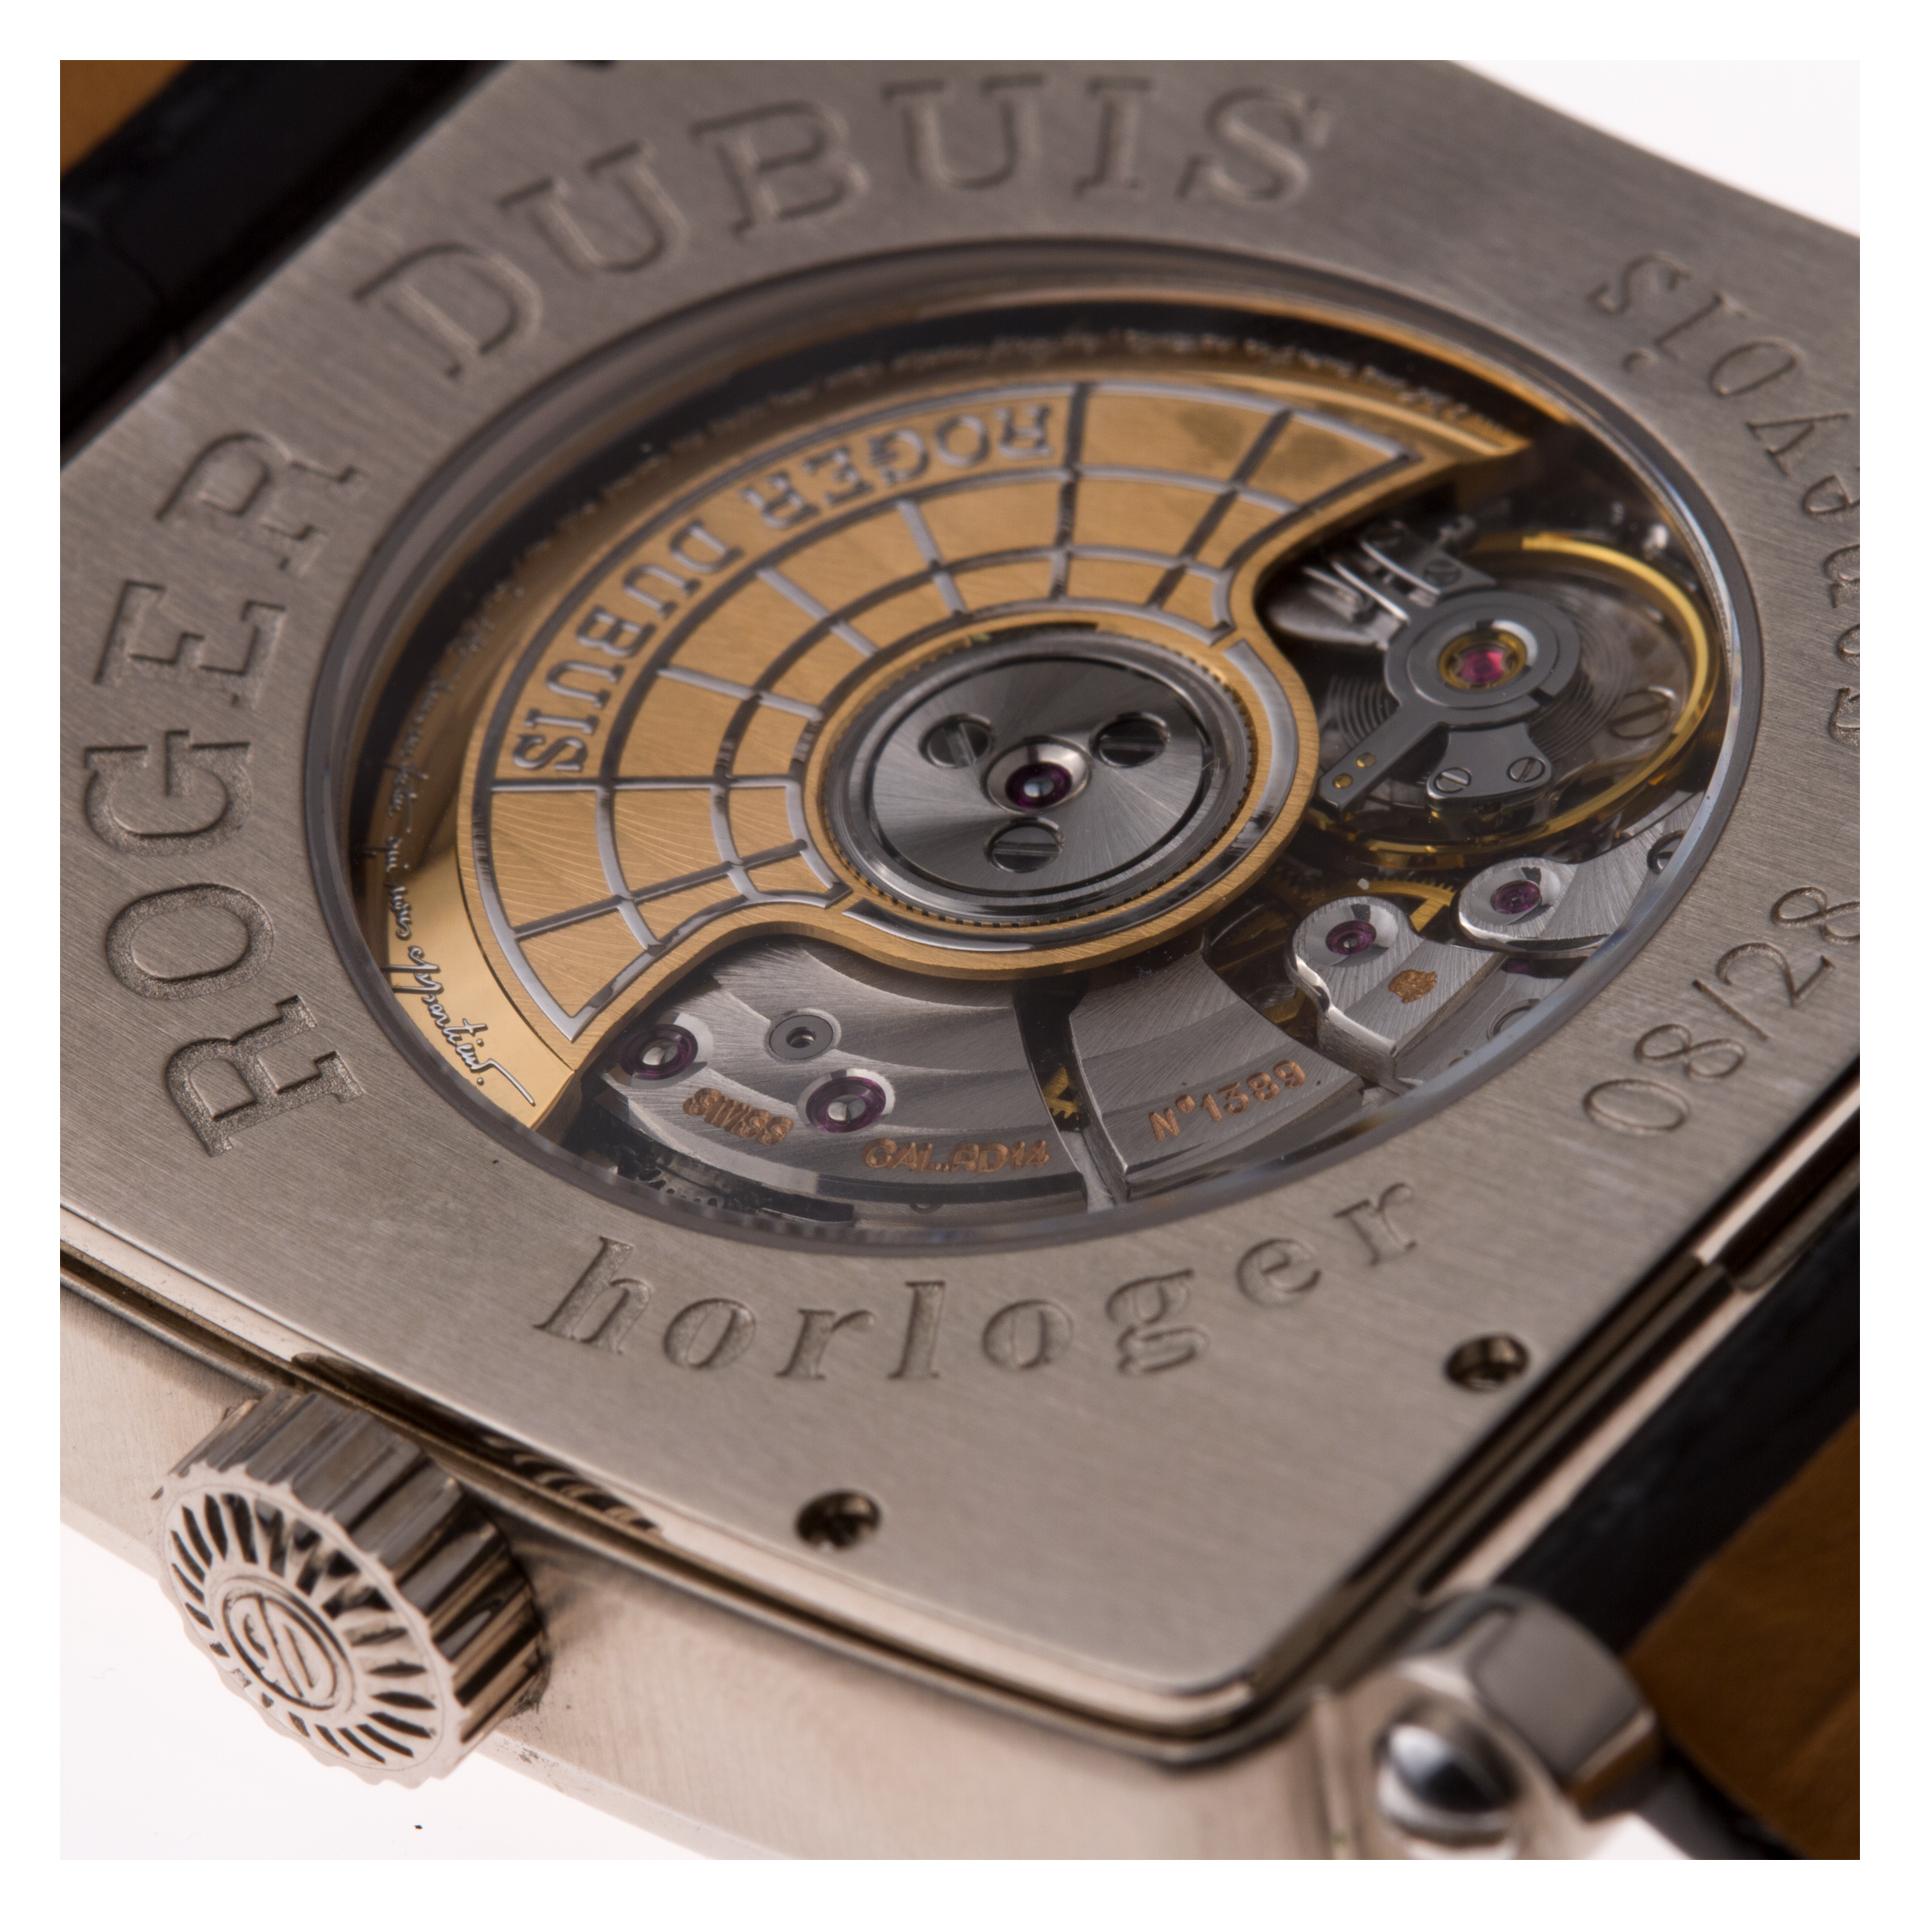 Roger Dubuis Golden Square 18k white gold watch Ref DBGS0322 In Excellent Condition For Sale In Surfside, FL